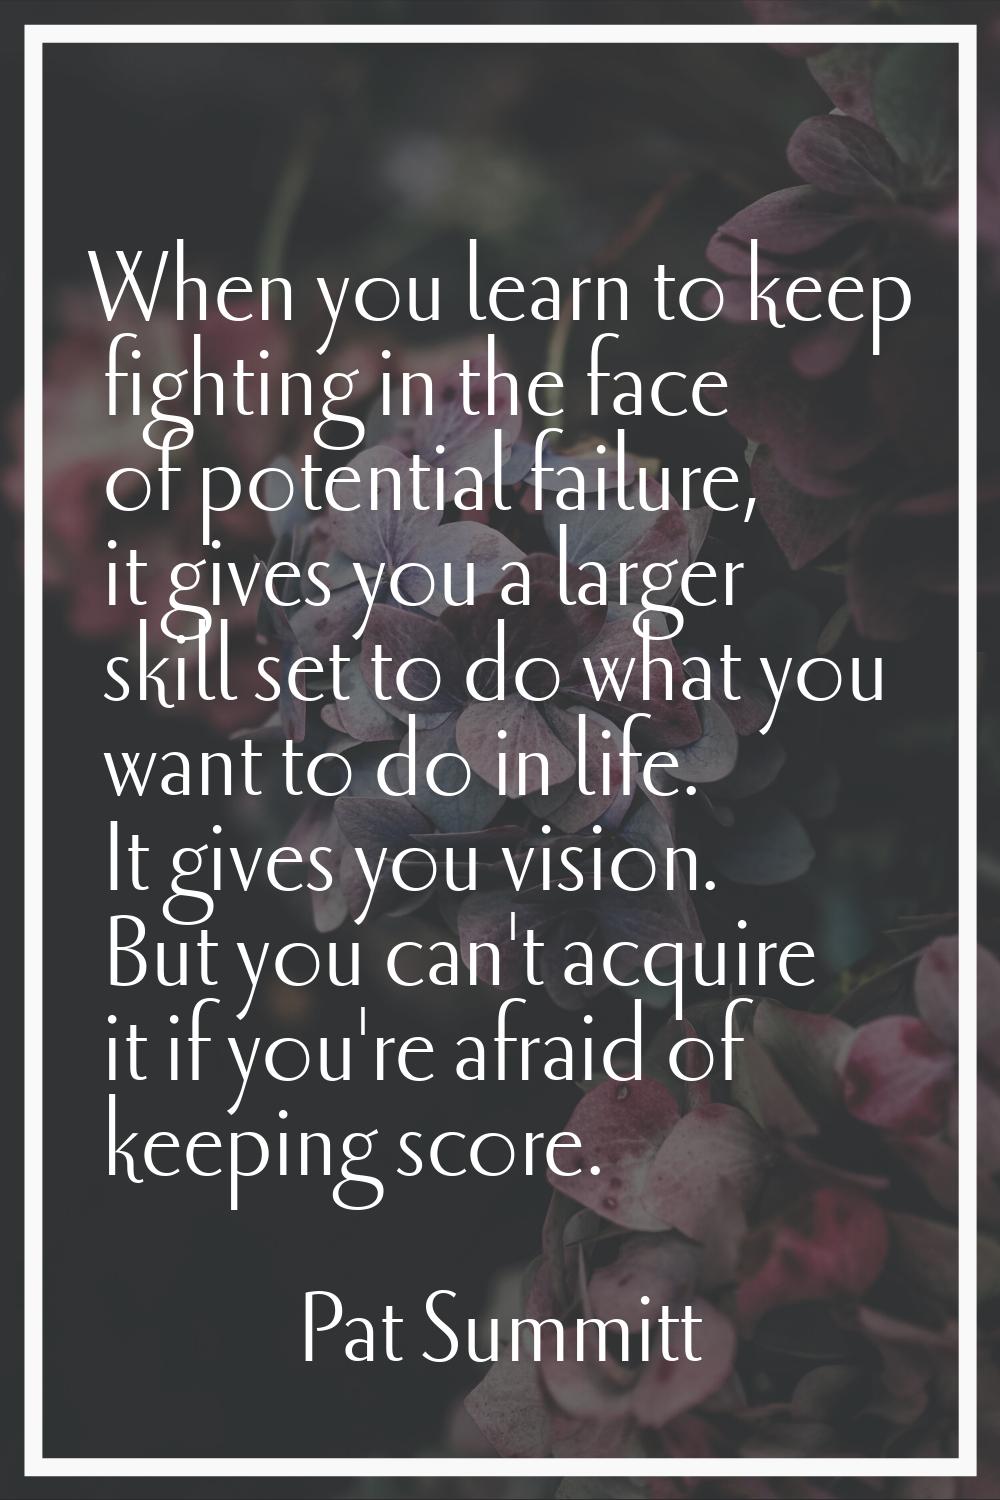 When you learn to keep fighting in the face of potential failure, it gives you a larger skill set t